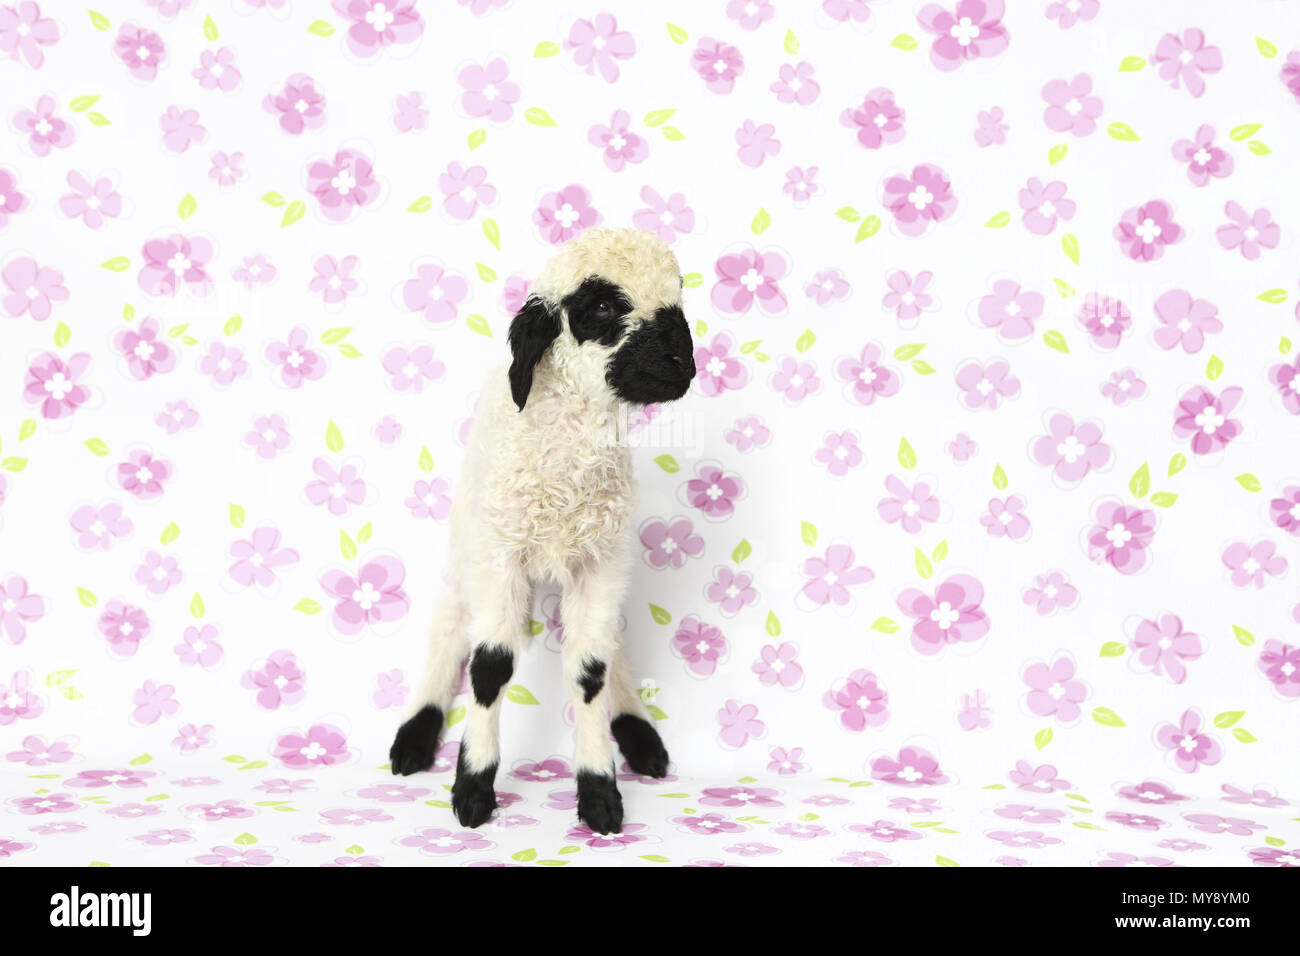 Valais Blacknose Sheep. Lamb (6 days old) standing. Studio picture against a white background with flowers. Germany Stock Photo